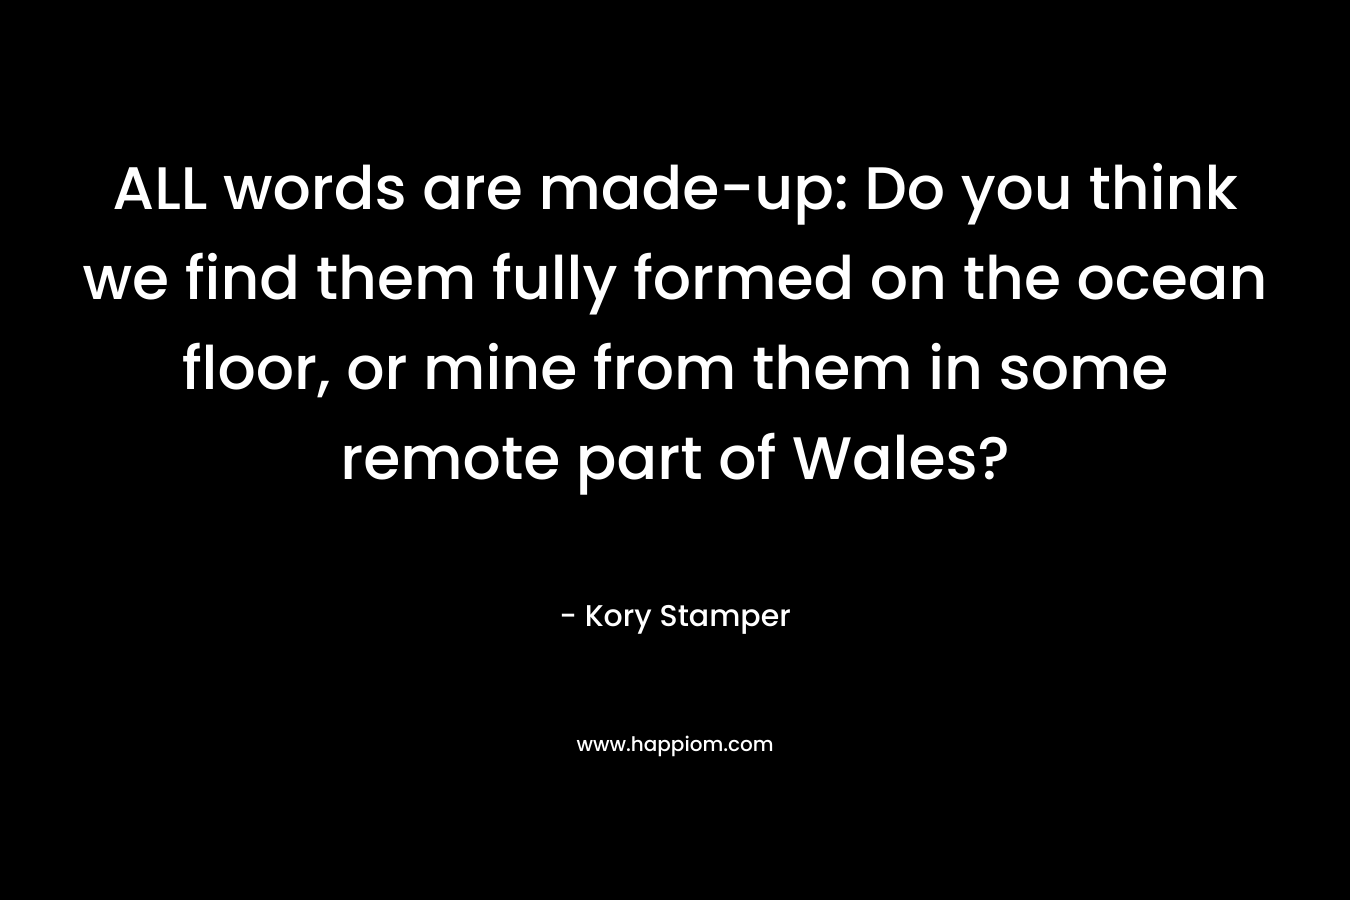 ALL words are made-up: Do you think we find them fully formed on the ocean floor, or mine from them in some remote part of Wales? – Kory Stamper